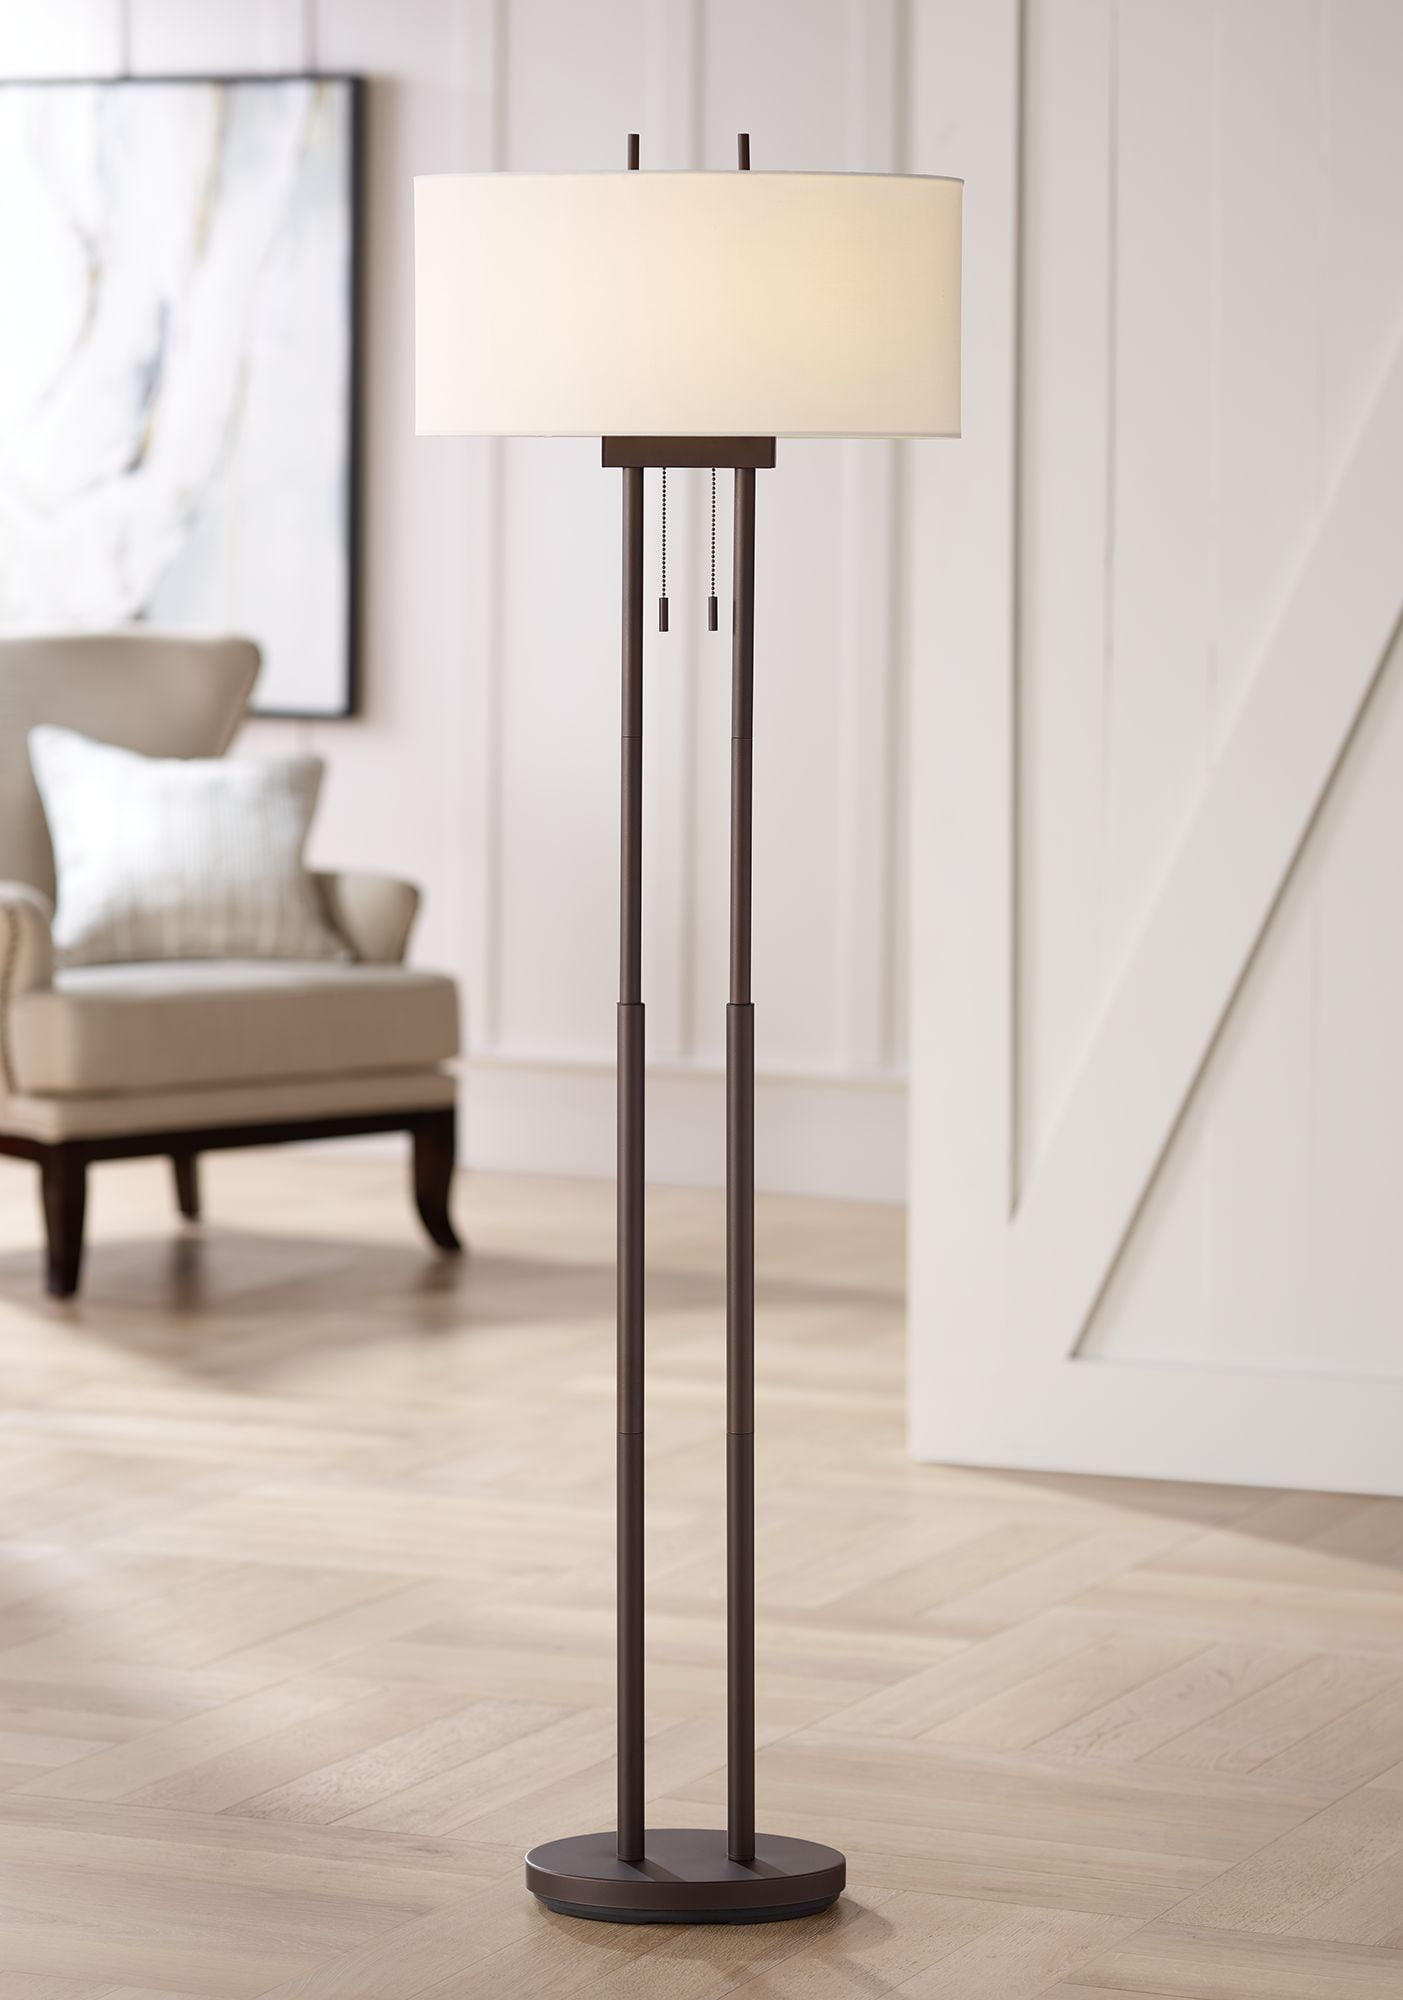 Extra Tall Stand Up Floor Lamp Garage Easy Carry For Office Living Room Bedroom 